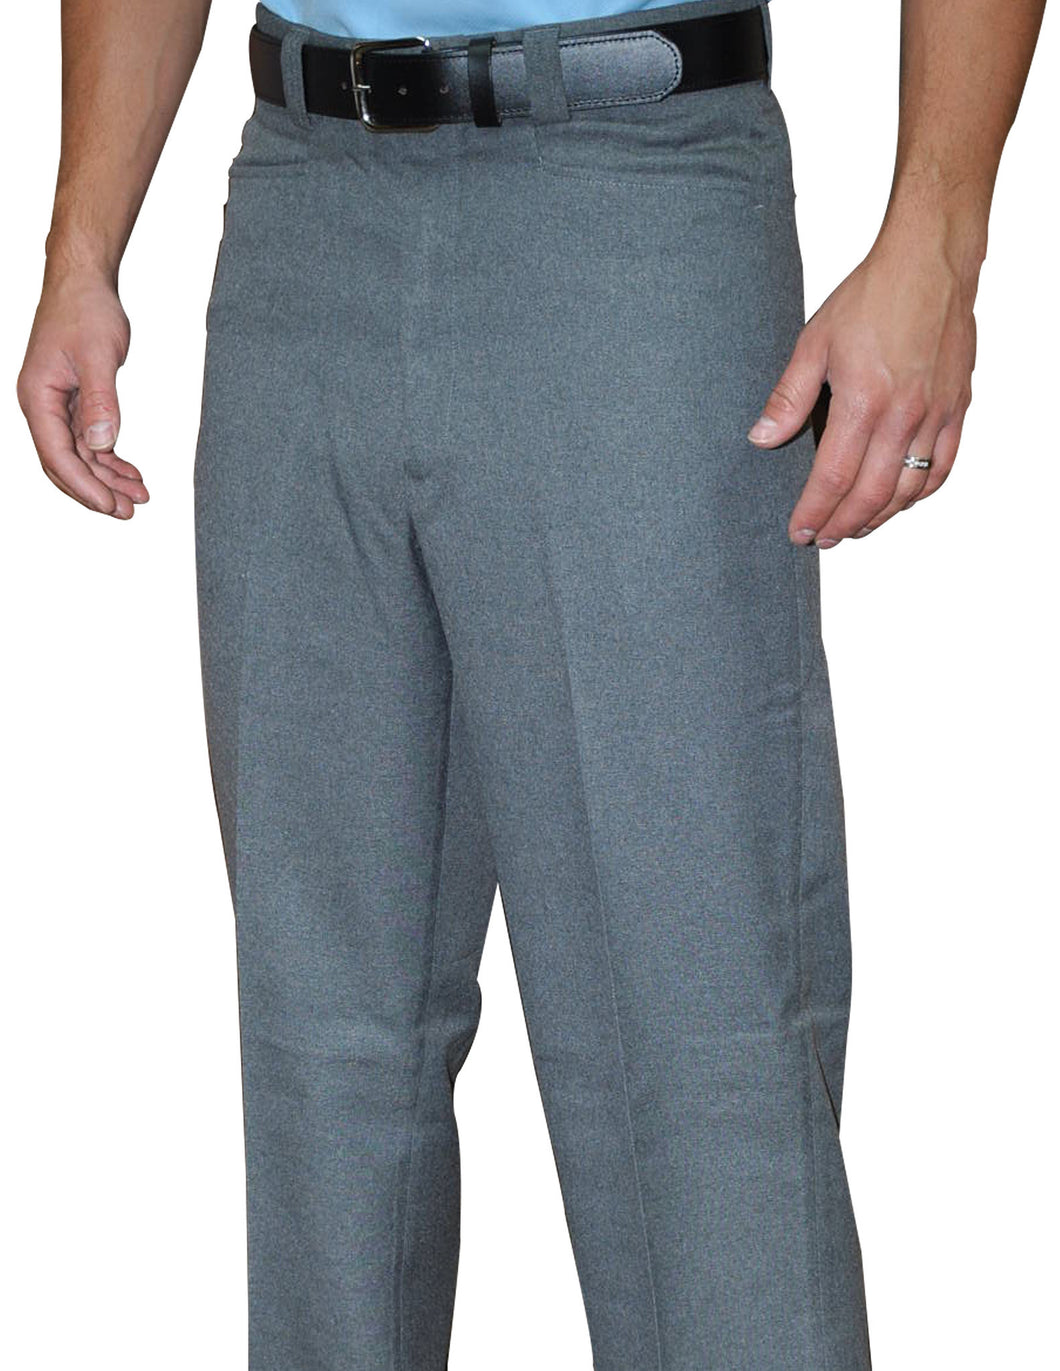 BBS380-Smitty Flat Front Base Pants - Heather Grey Only